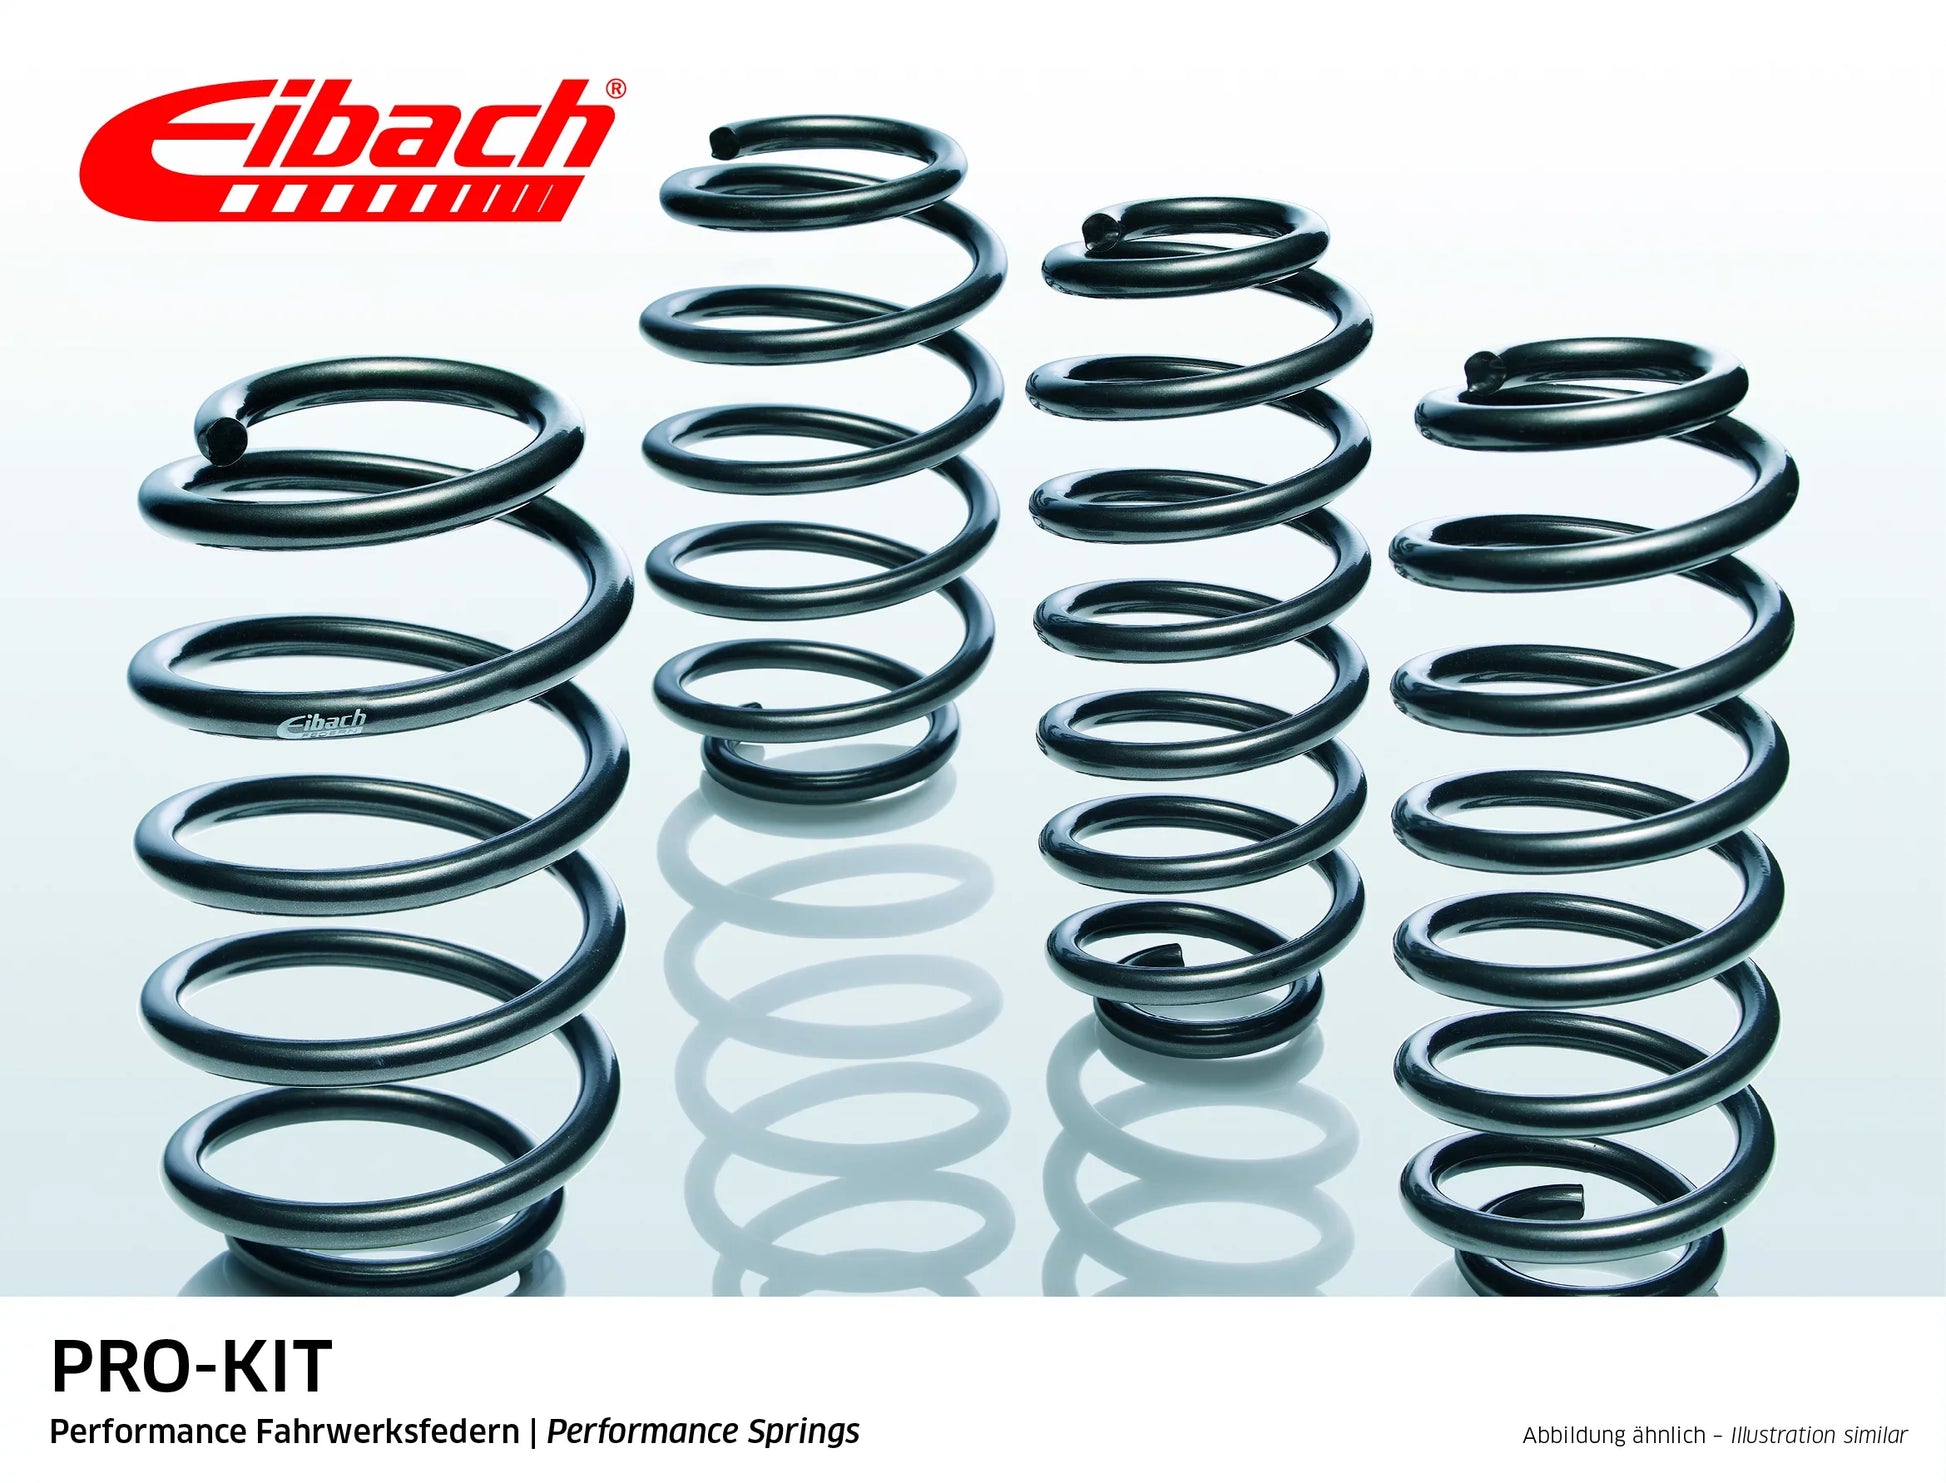 Eibach Pro-Kit Lowering Springs (E10-25-001-08-22) at £244.80